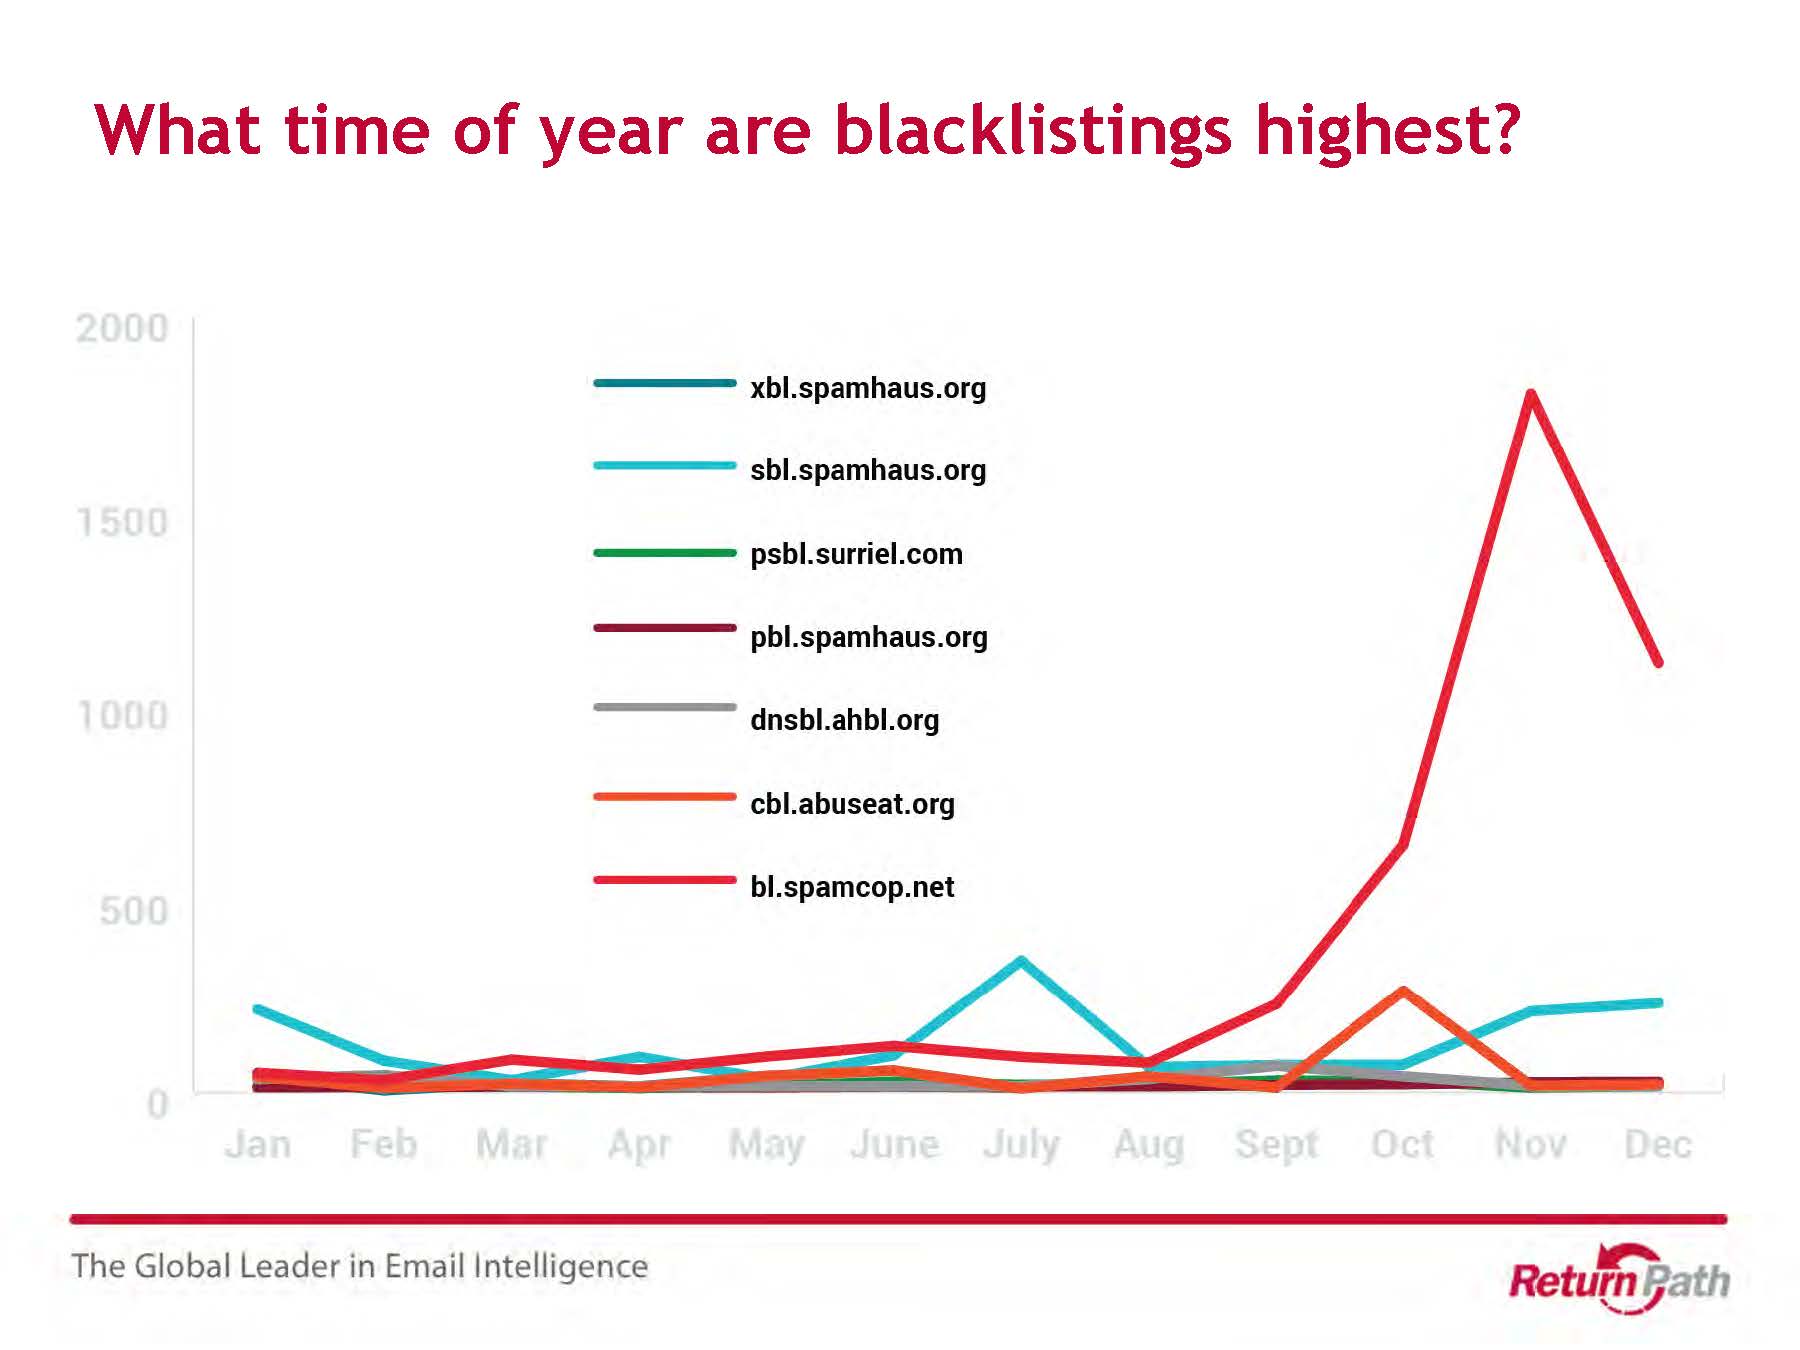 What time of year are blacklistings highest?